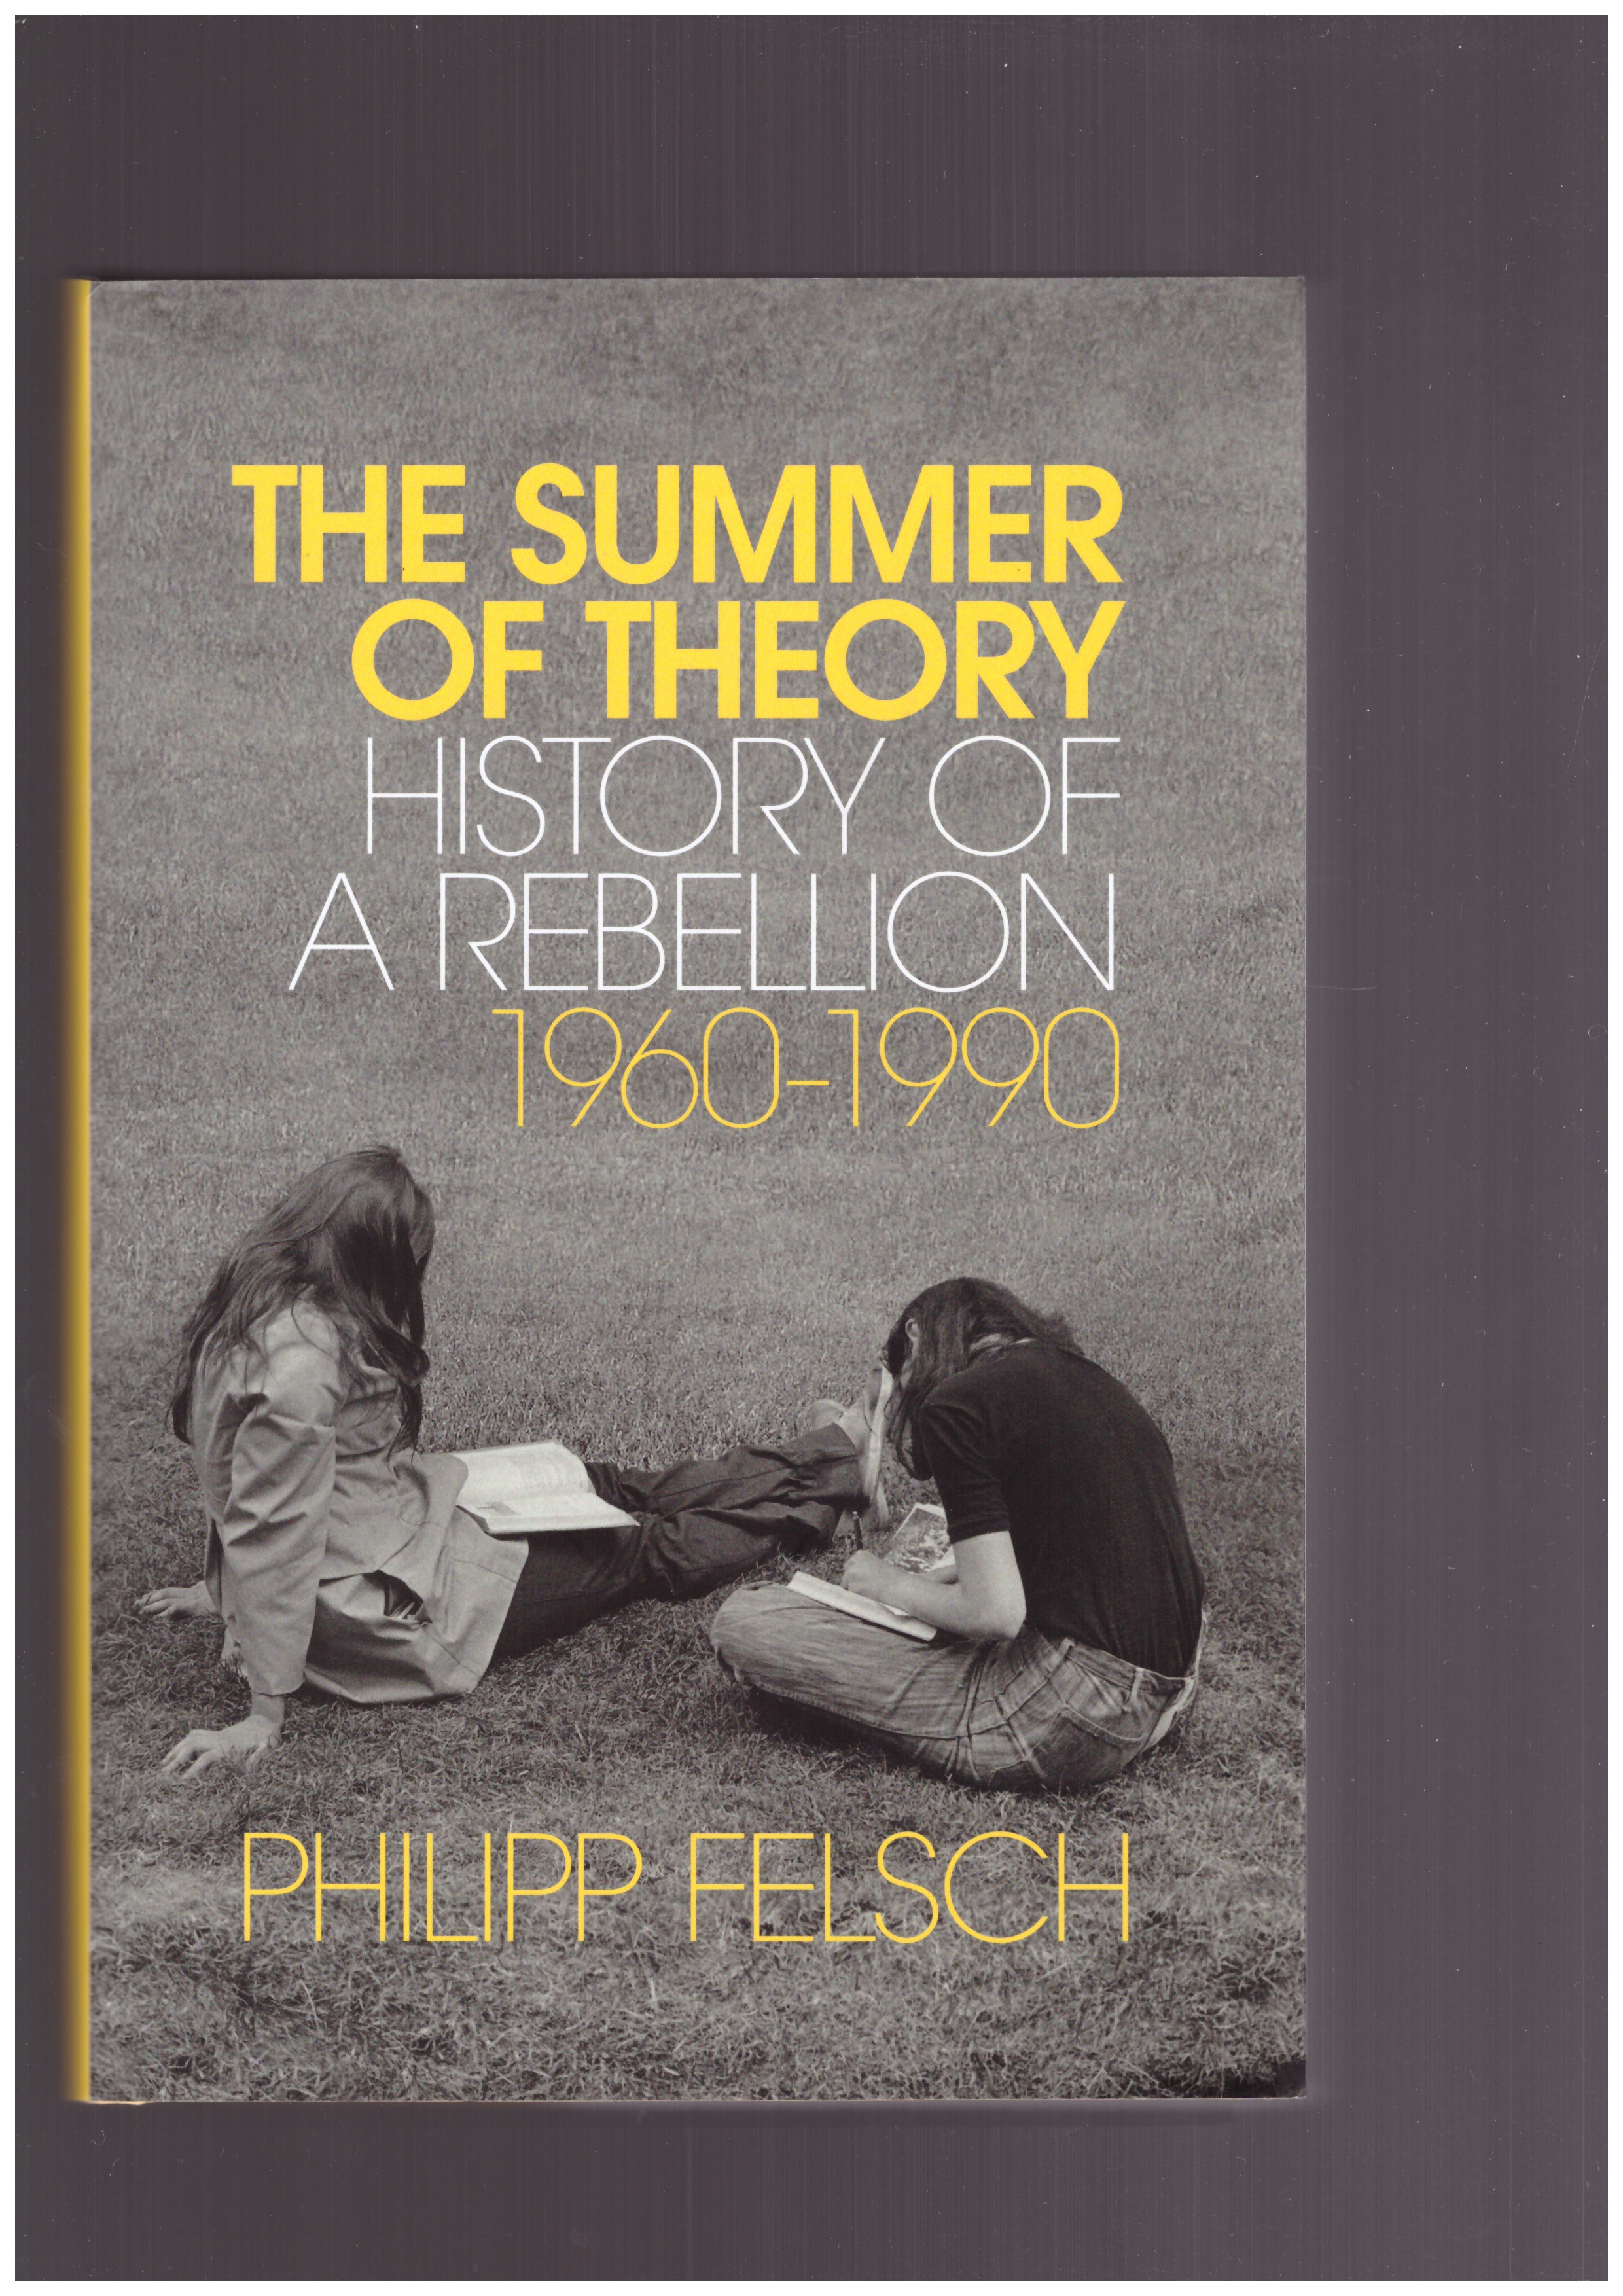 FELSCH, Philipp - The summer of theory - History of a rebellion 1960-1990